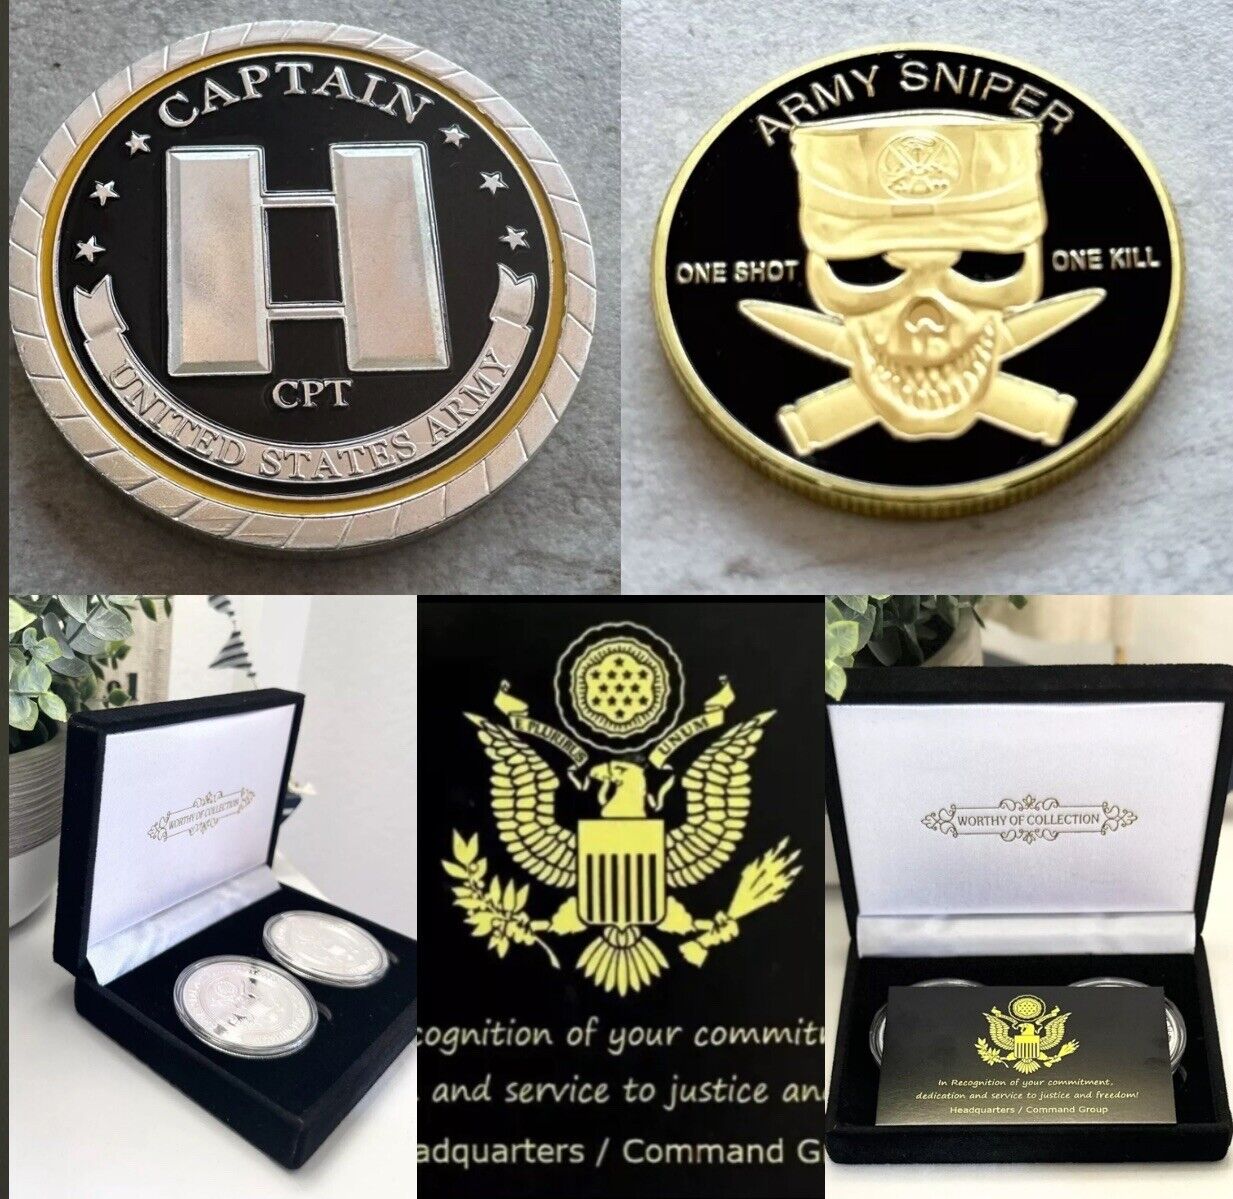 2pcs Army Rank Captain O-3 And SNIPER ONE SHOT ONE KILL CHALLENGE COINS